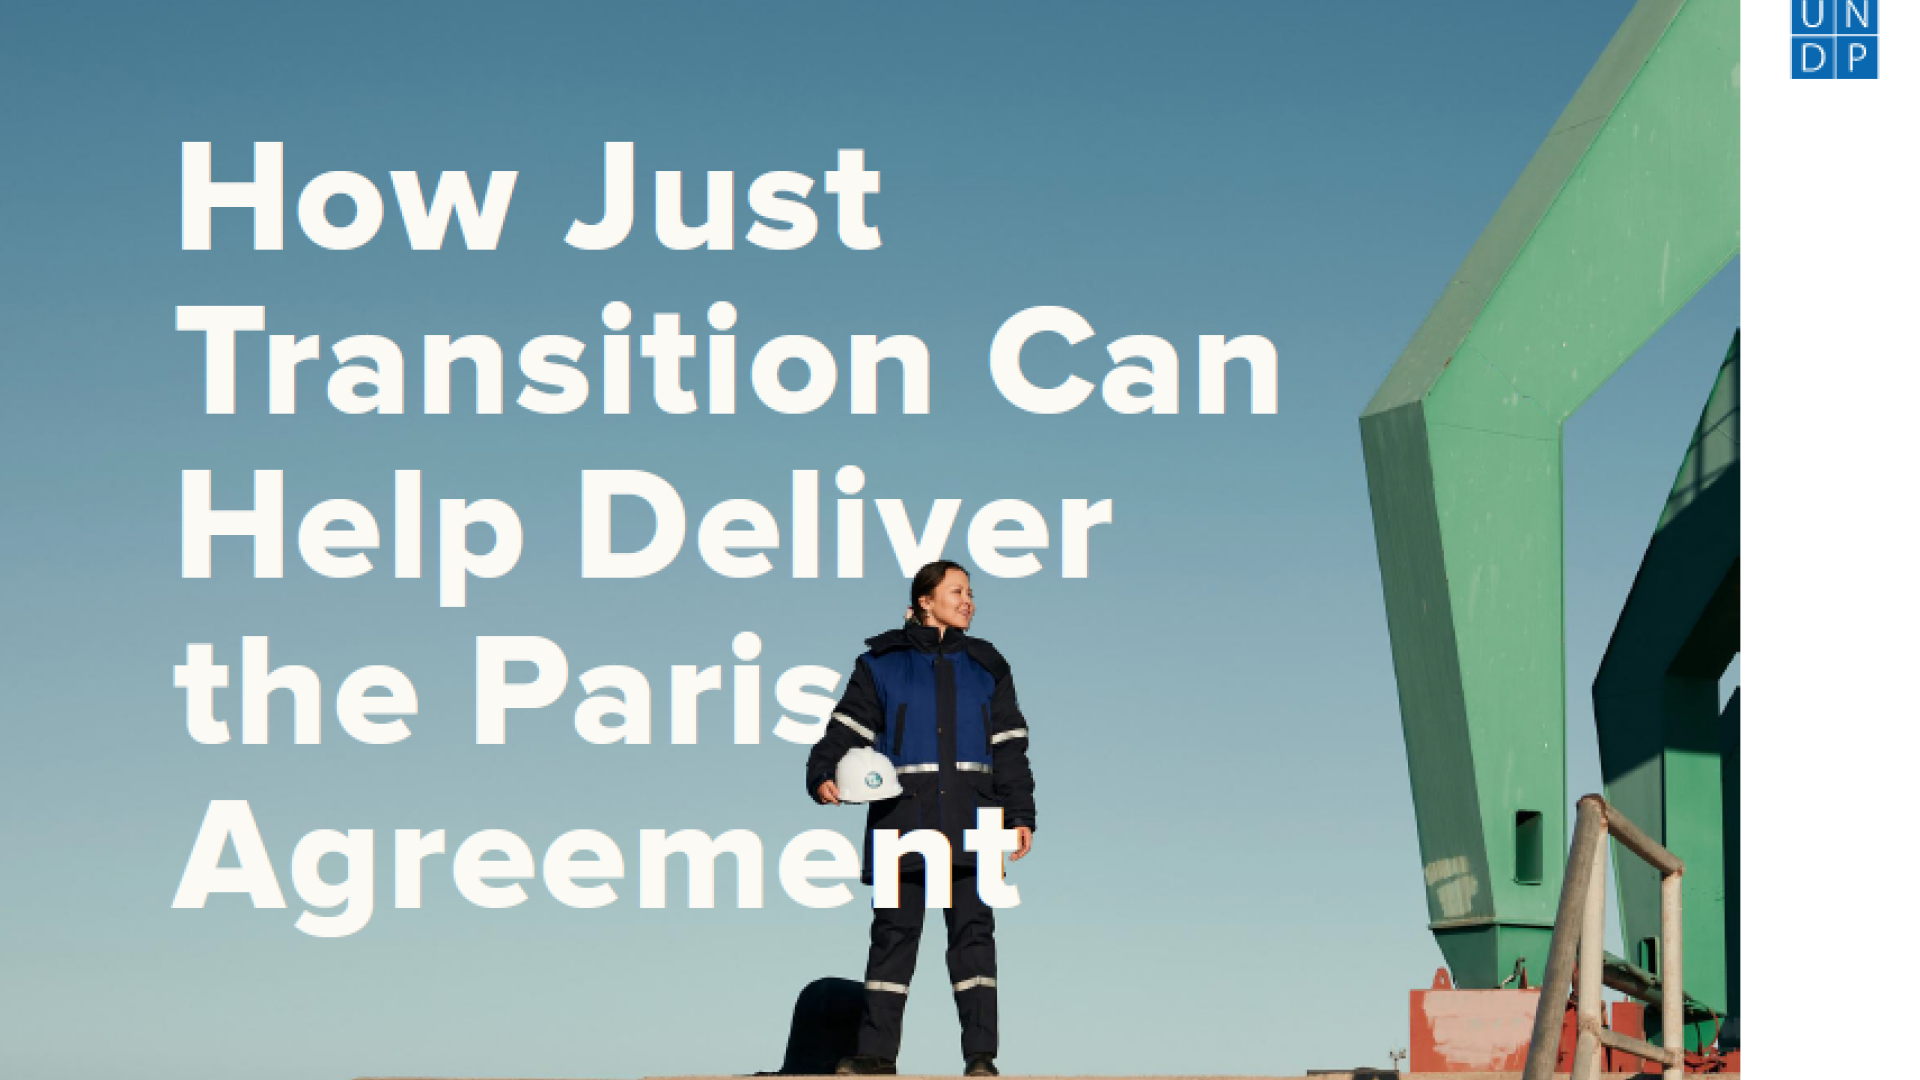 How Just Transition Can Help Deliver the Paris Agreement